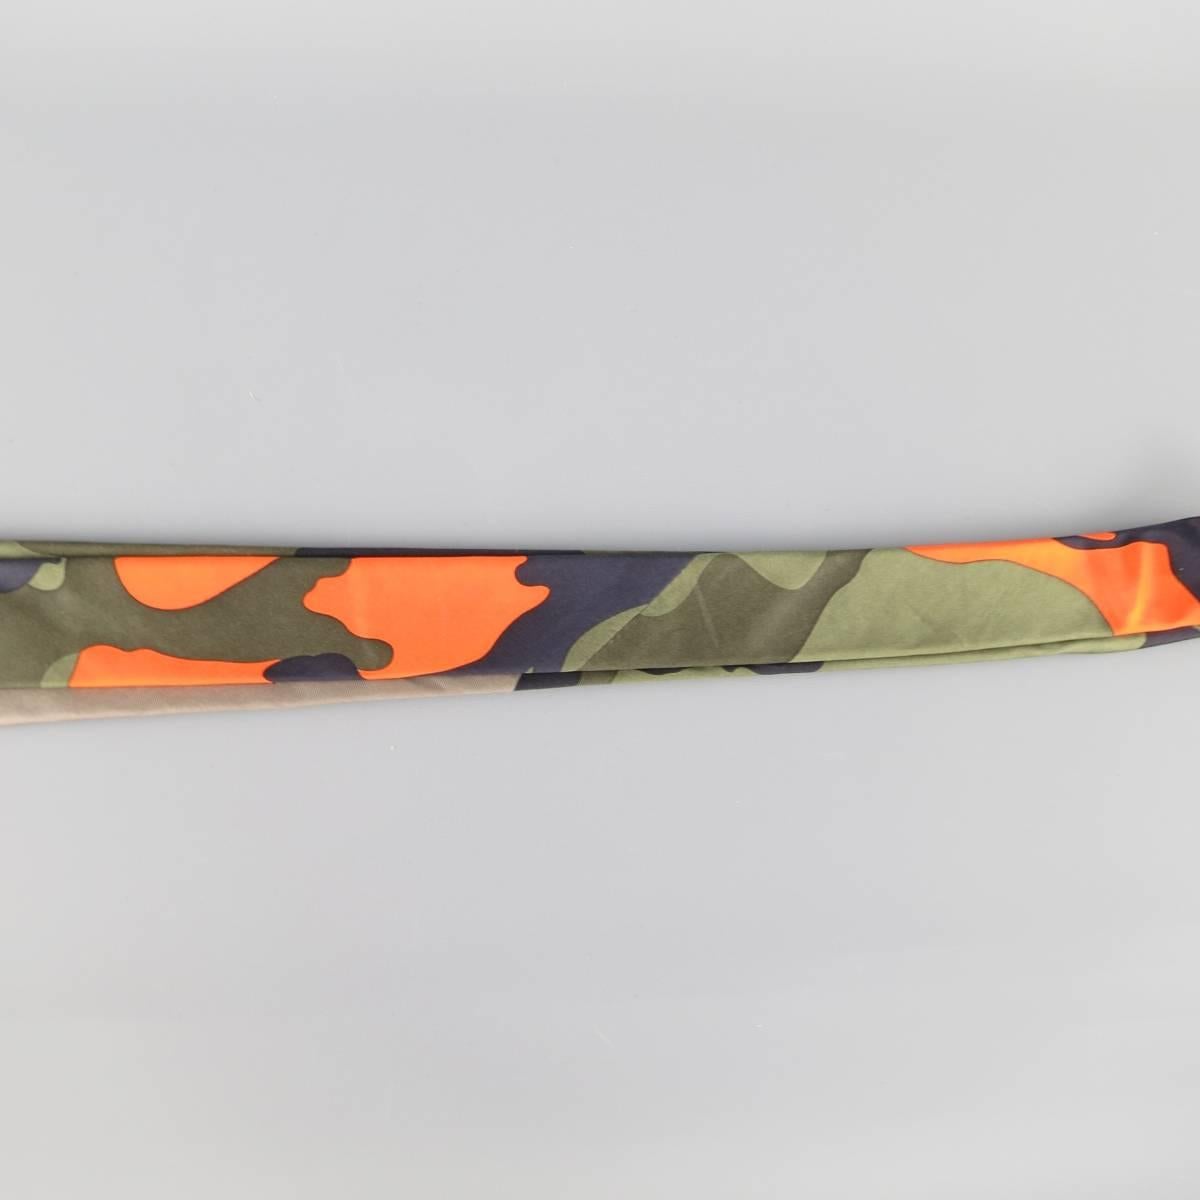 VALENTINO dress tie comes in large scale camouflage print with hues of olive green, charcoal gray  and black with neon orange details on back. Made in Italy.
 
Excellent Pre-Owned Condition.
 
Width: 3.25 in.

SKU: 83860